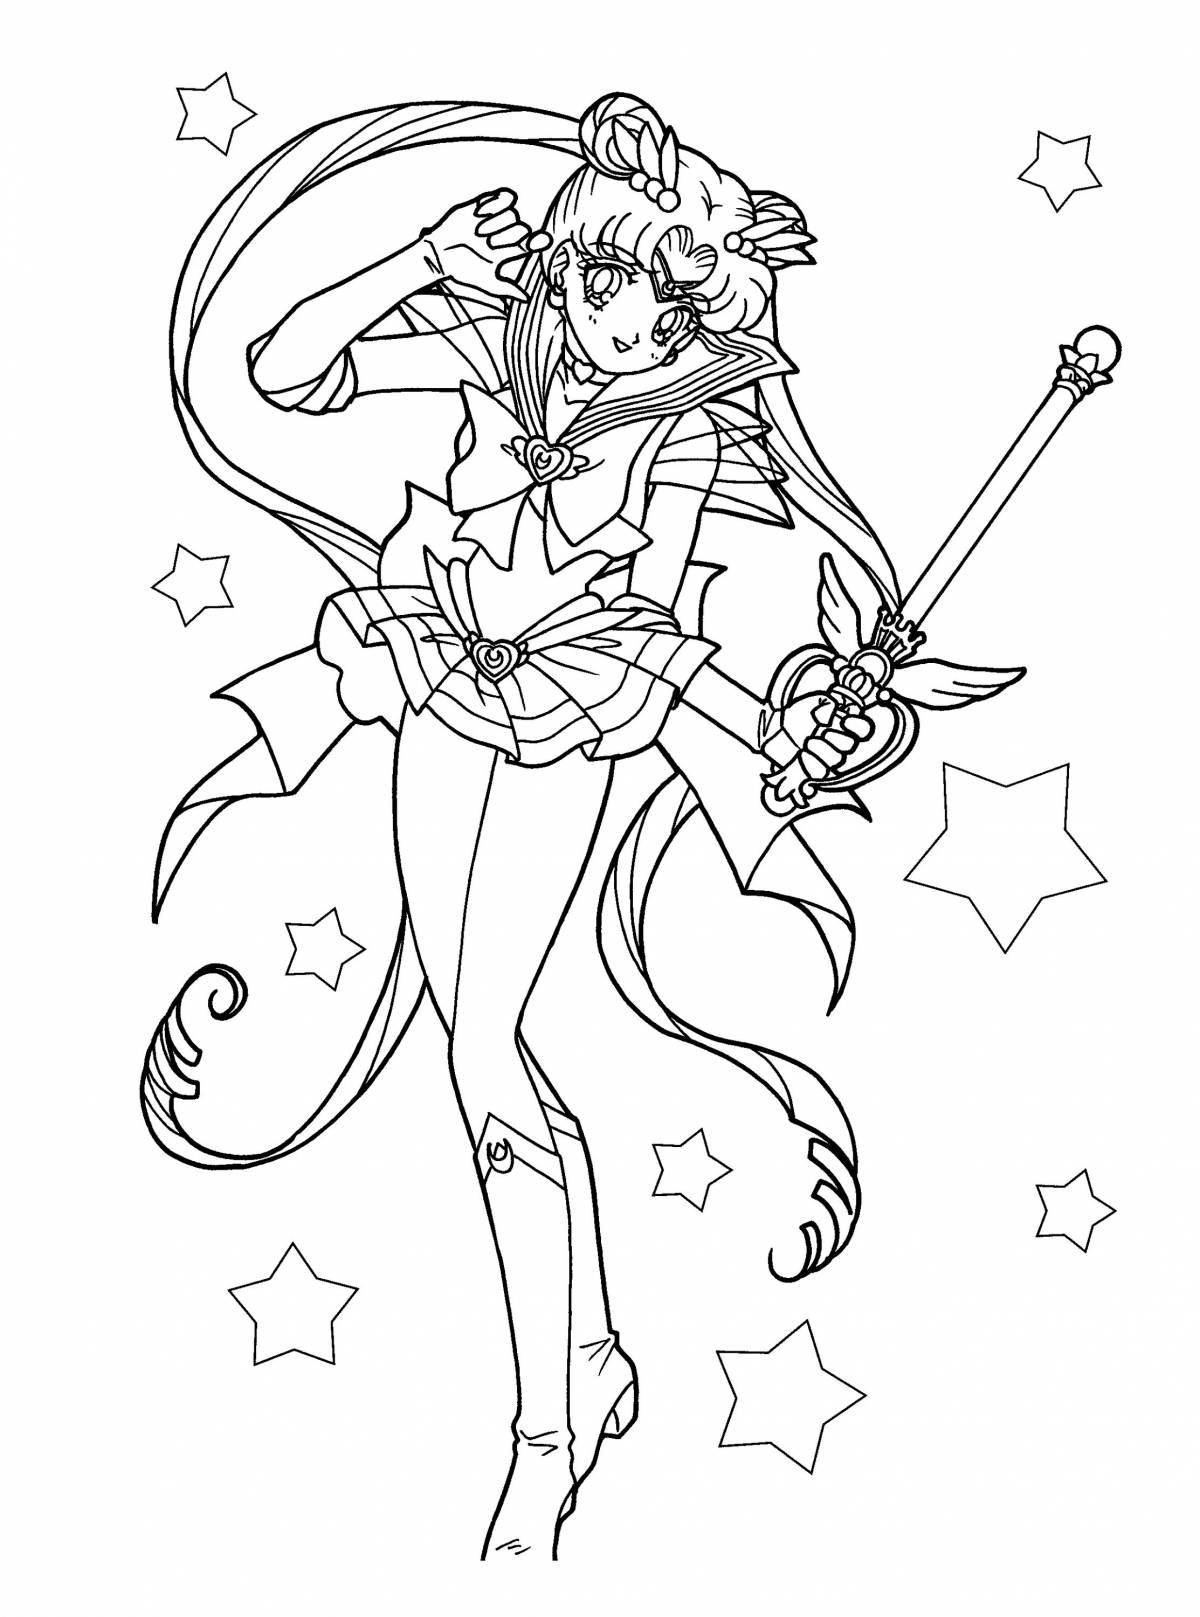 Delightful coloring book for girls sailor moon